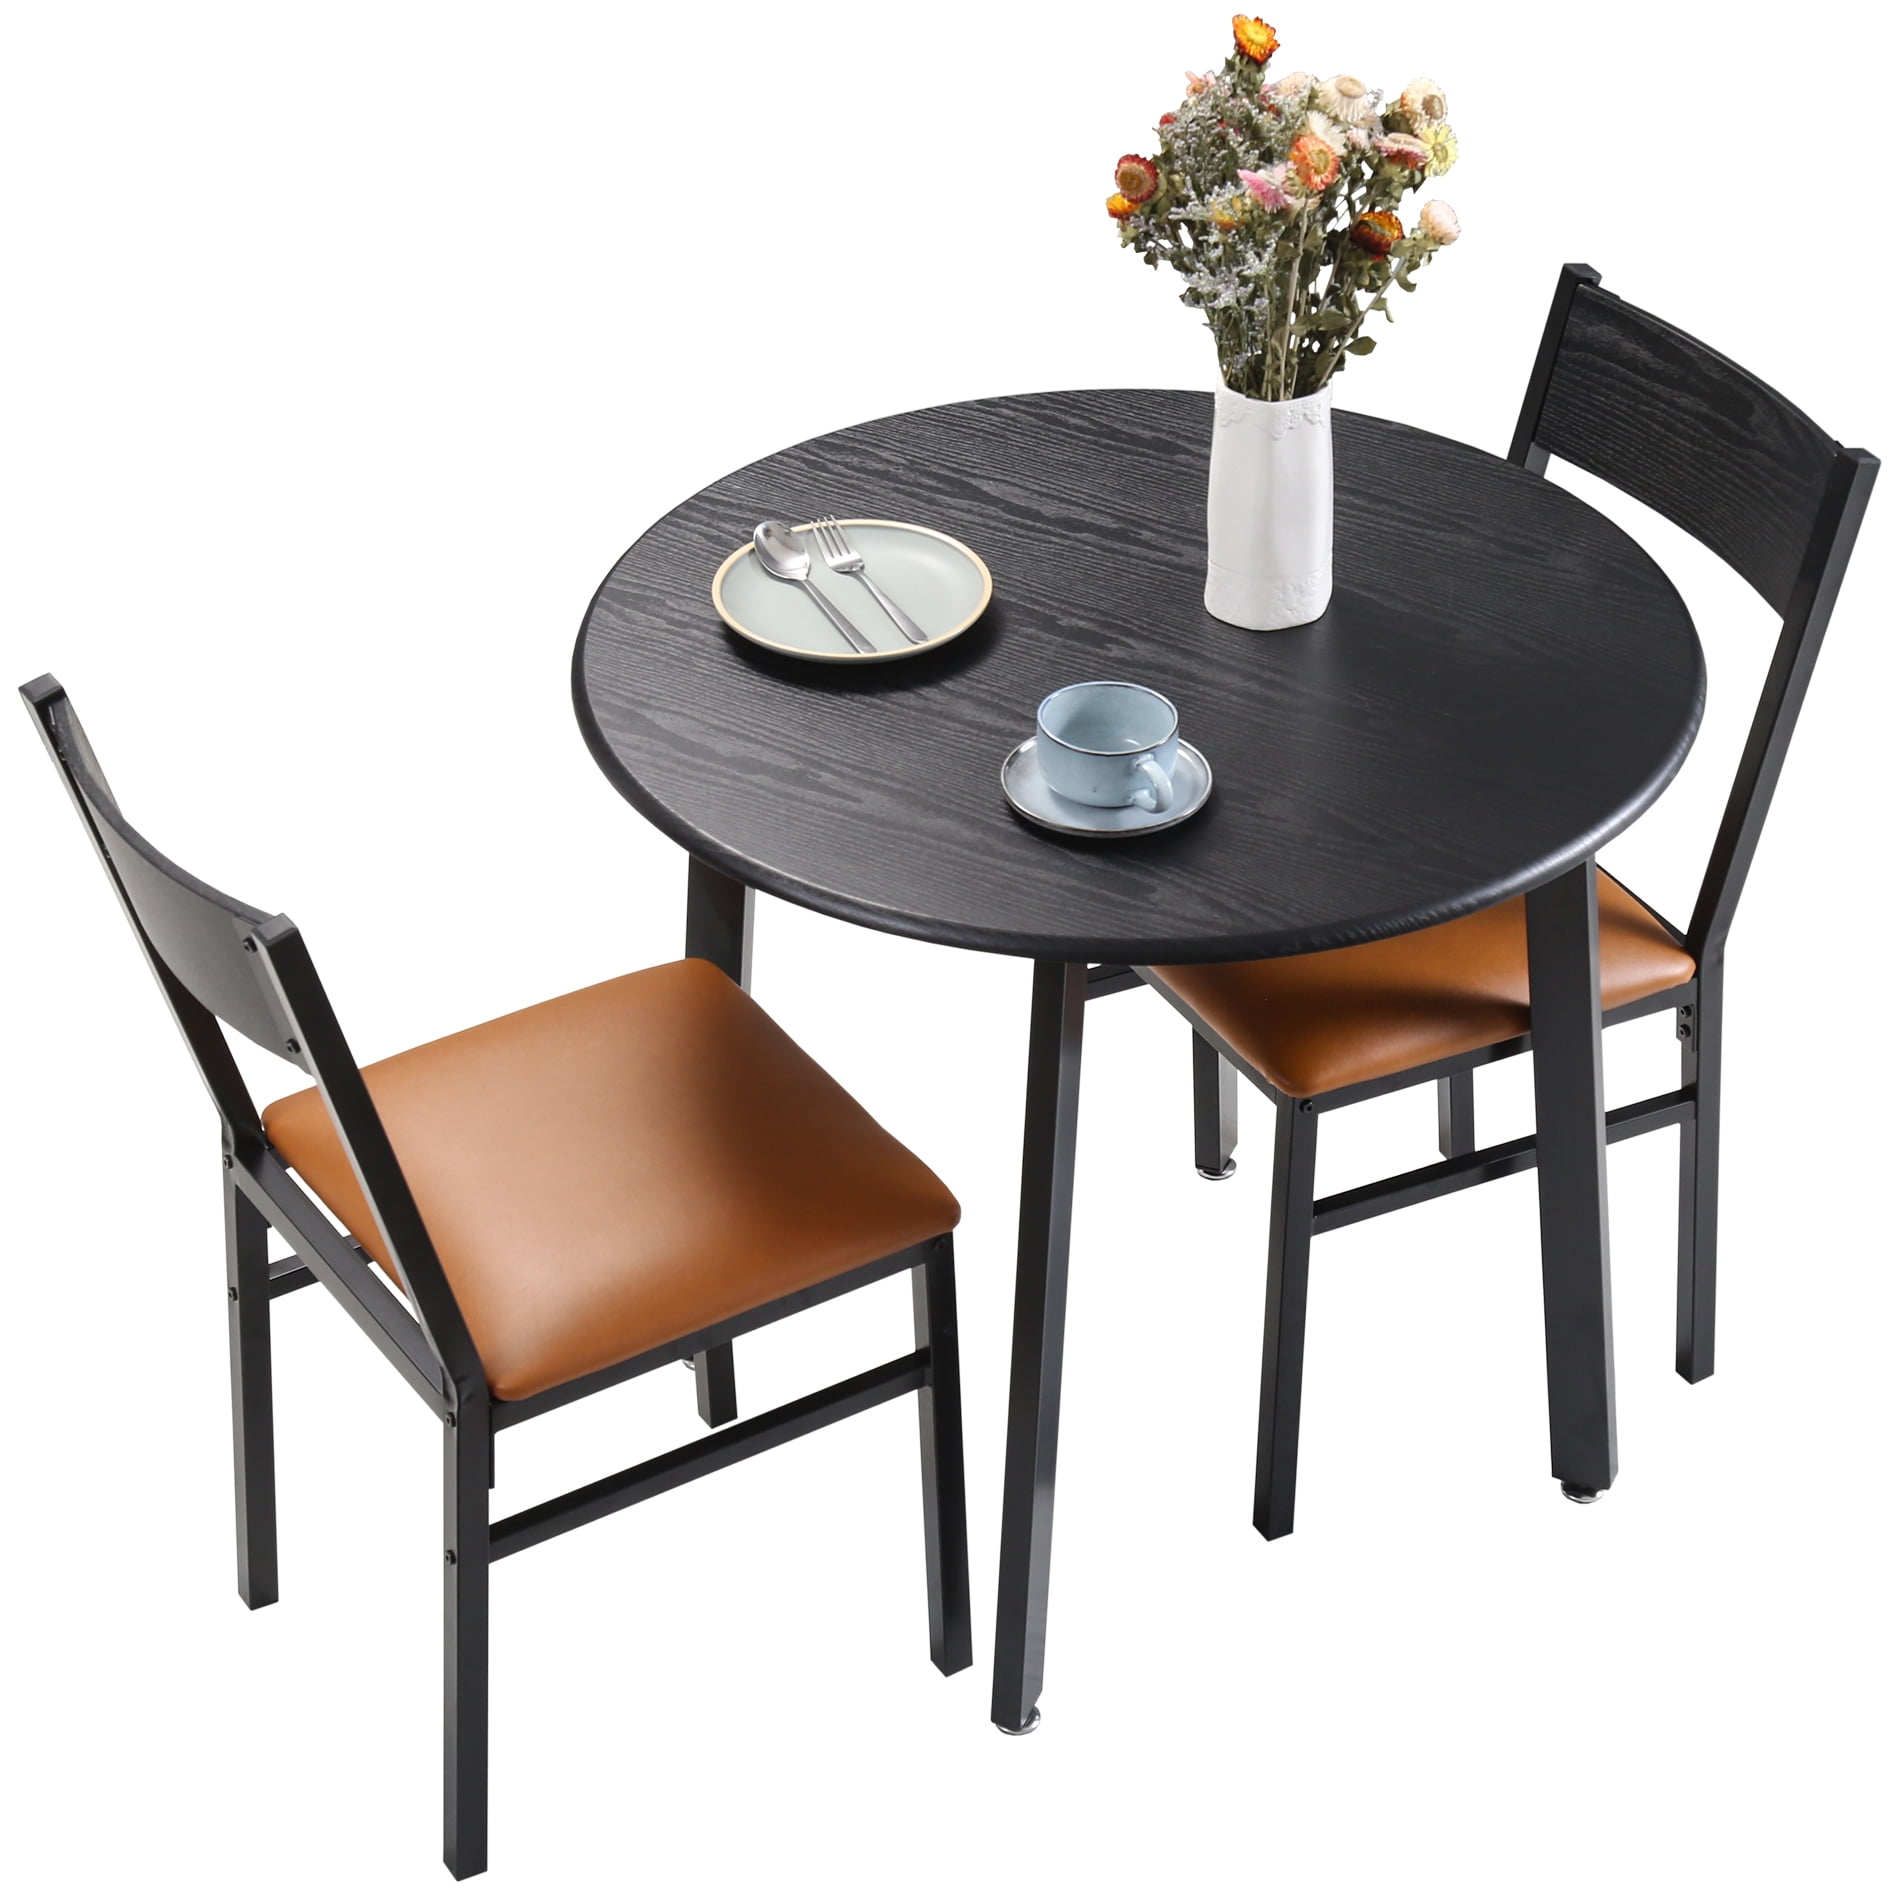 3 Piece Round Dining Table Set With, Small Round Breakfast Table And Chairs